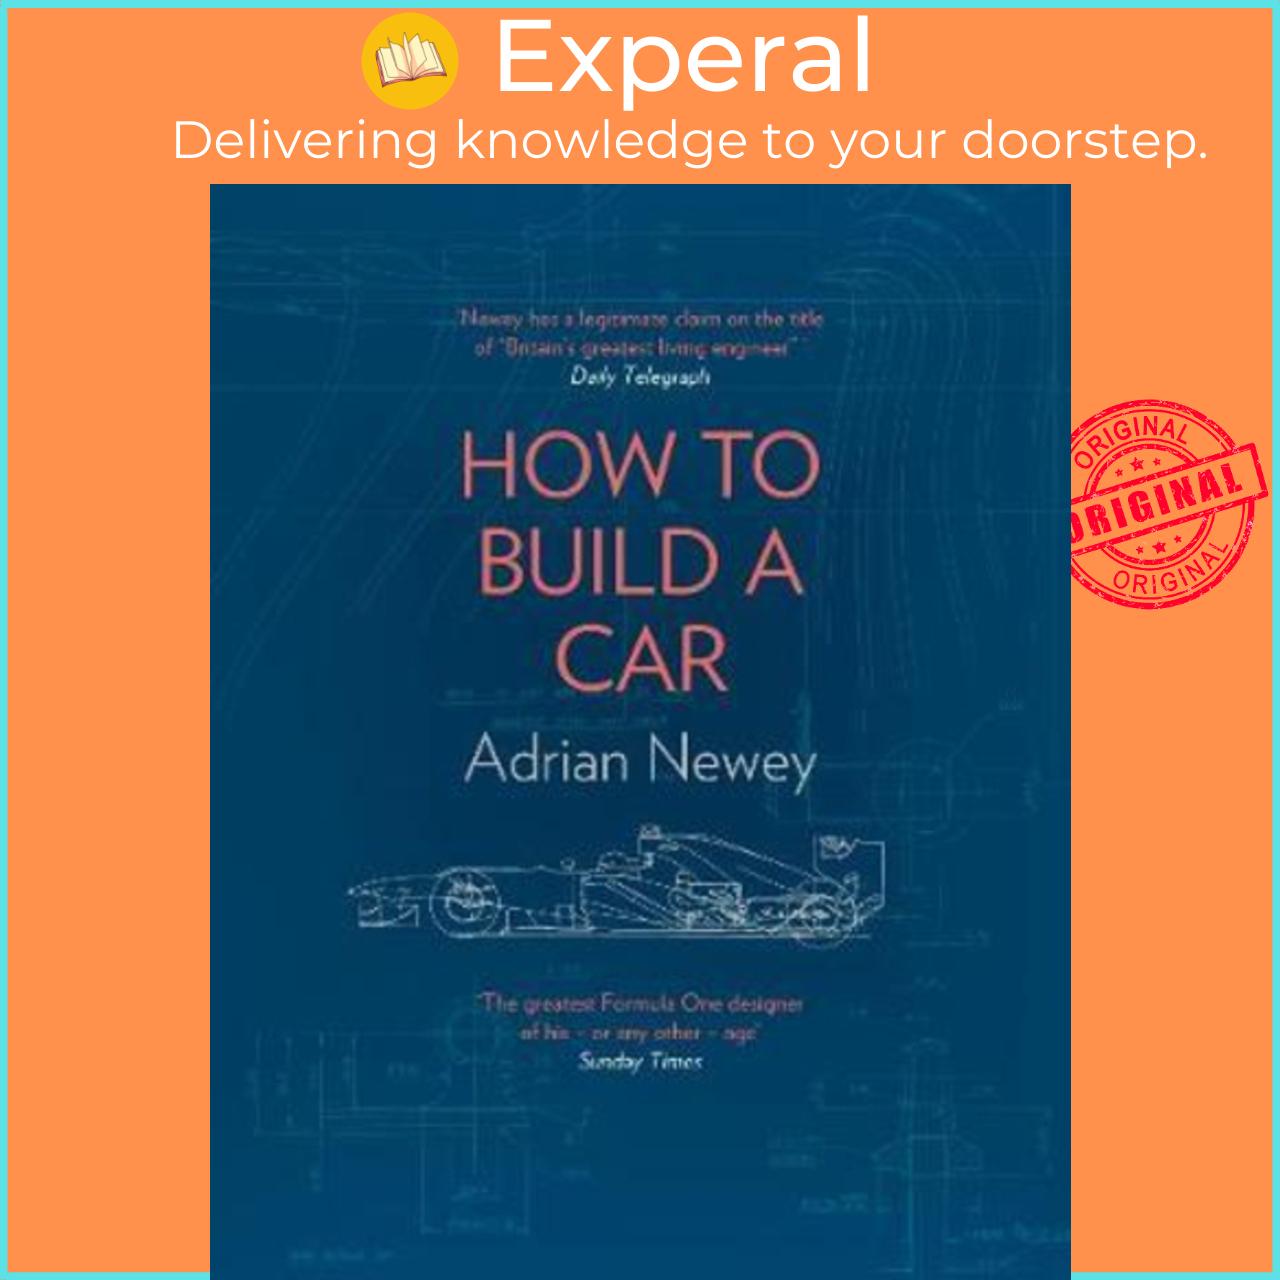 Sách - How to Build a Car : The Autobiography of the World's Greatest Formula 1  by Adrian Newey (UK edition, hardcover)